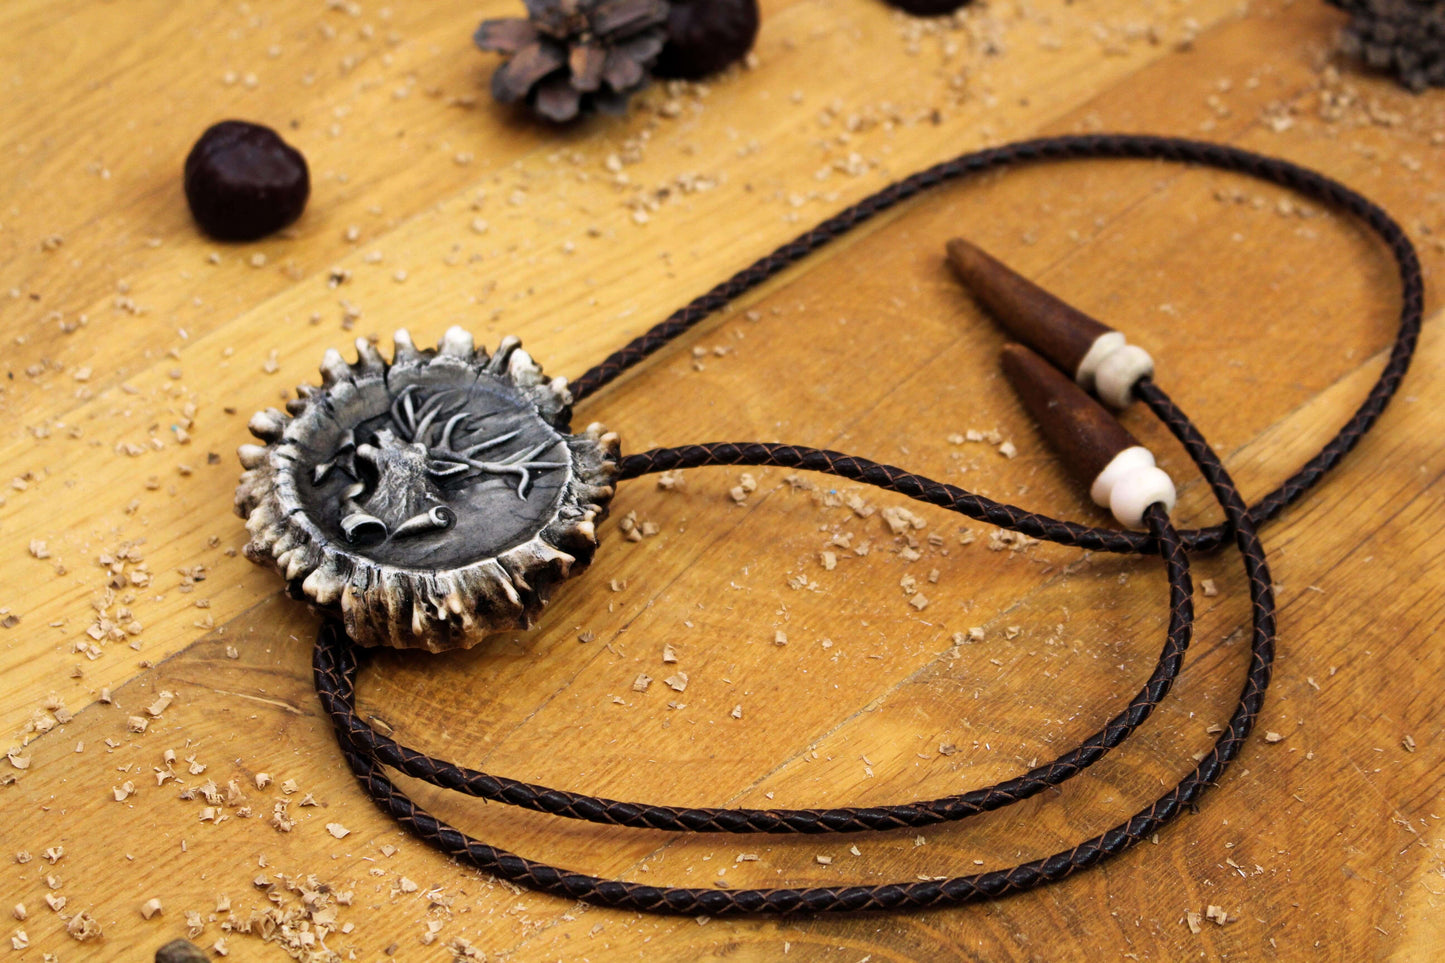 Handmade Deer Antler Bolo Tie with leather cord and Deer Horn tips with a unique design